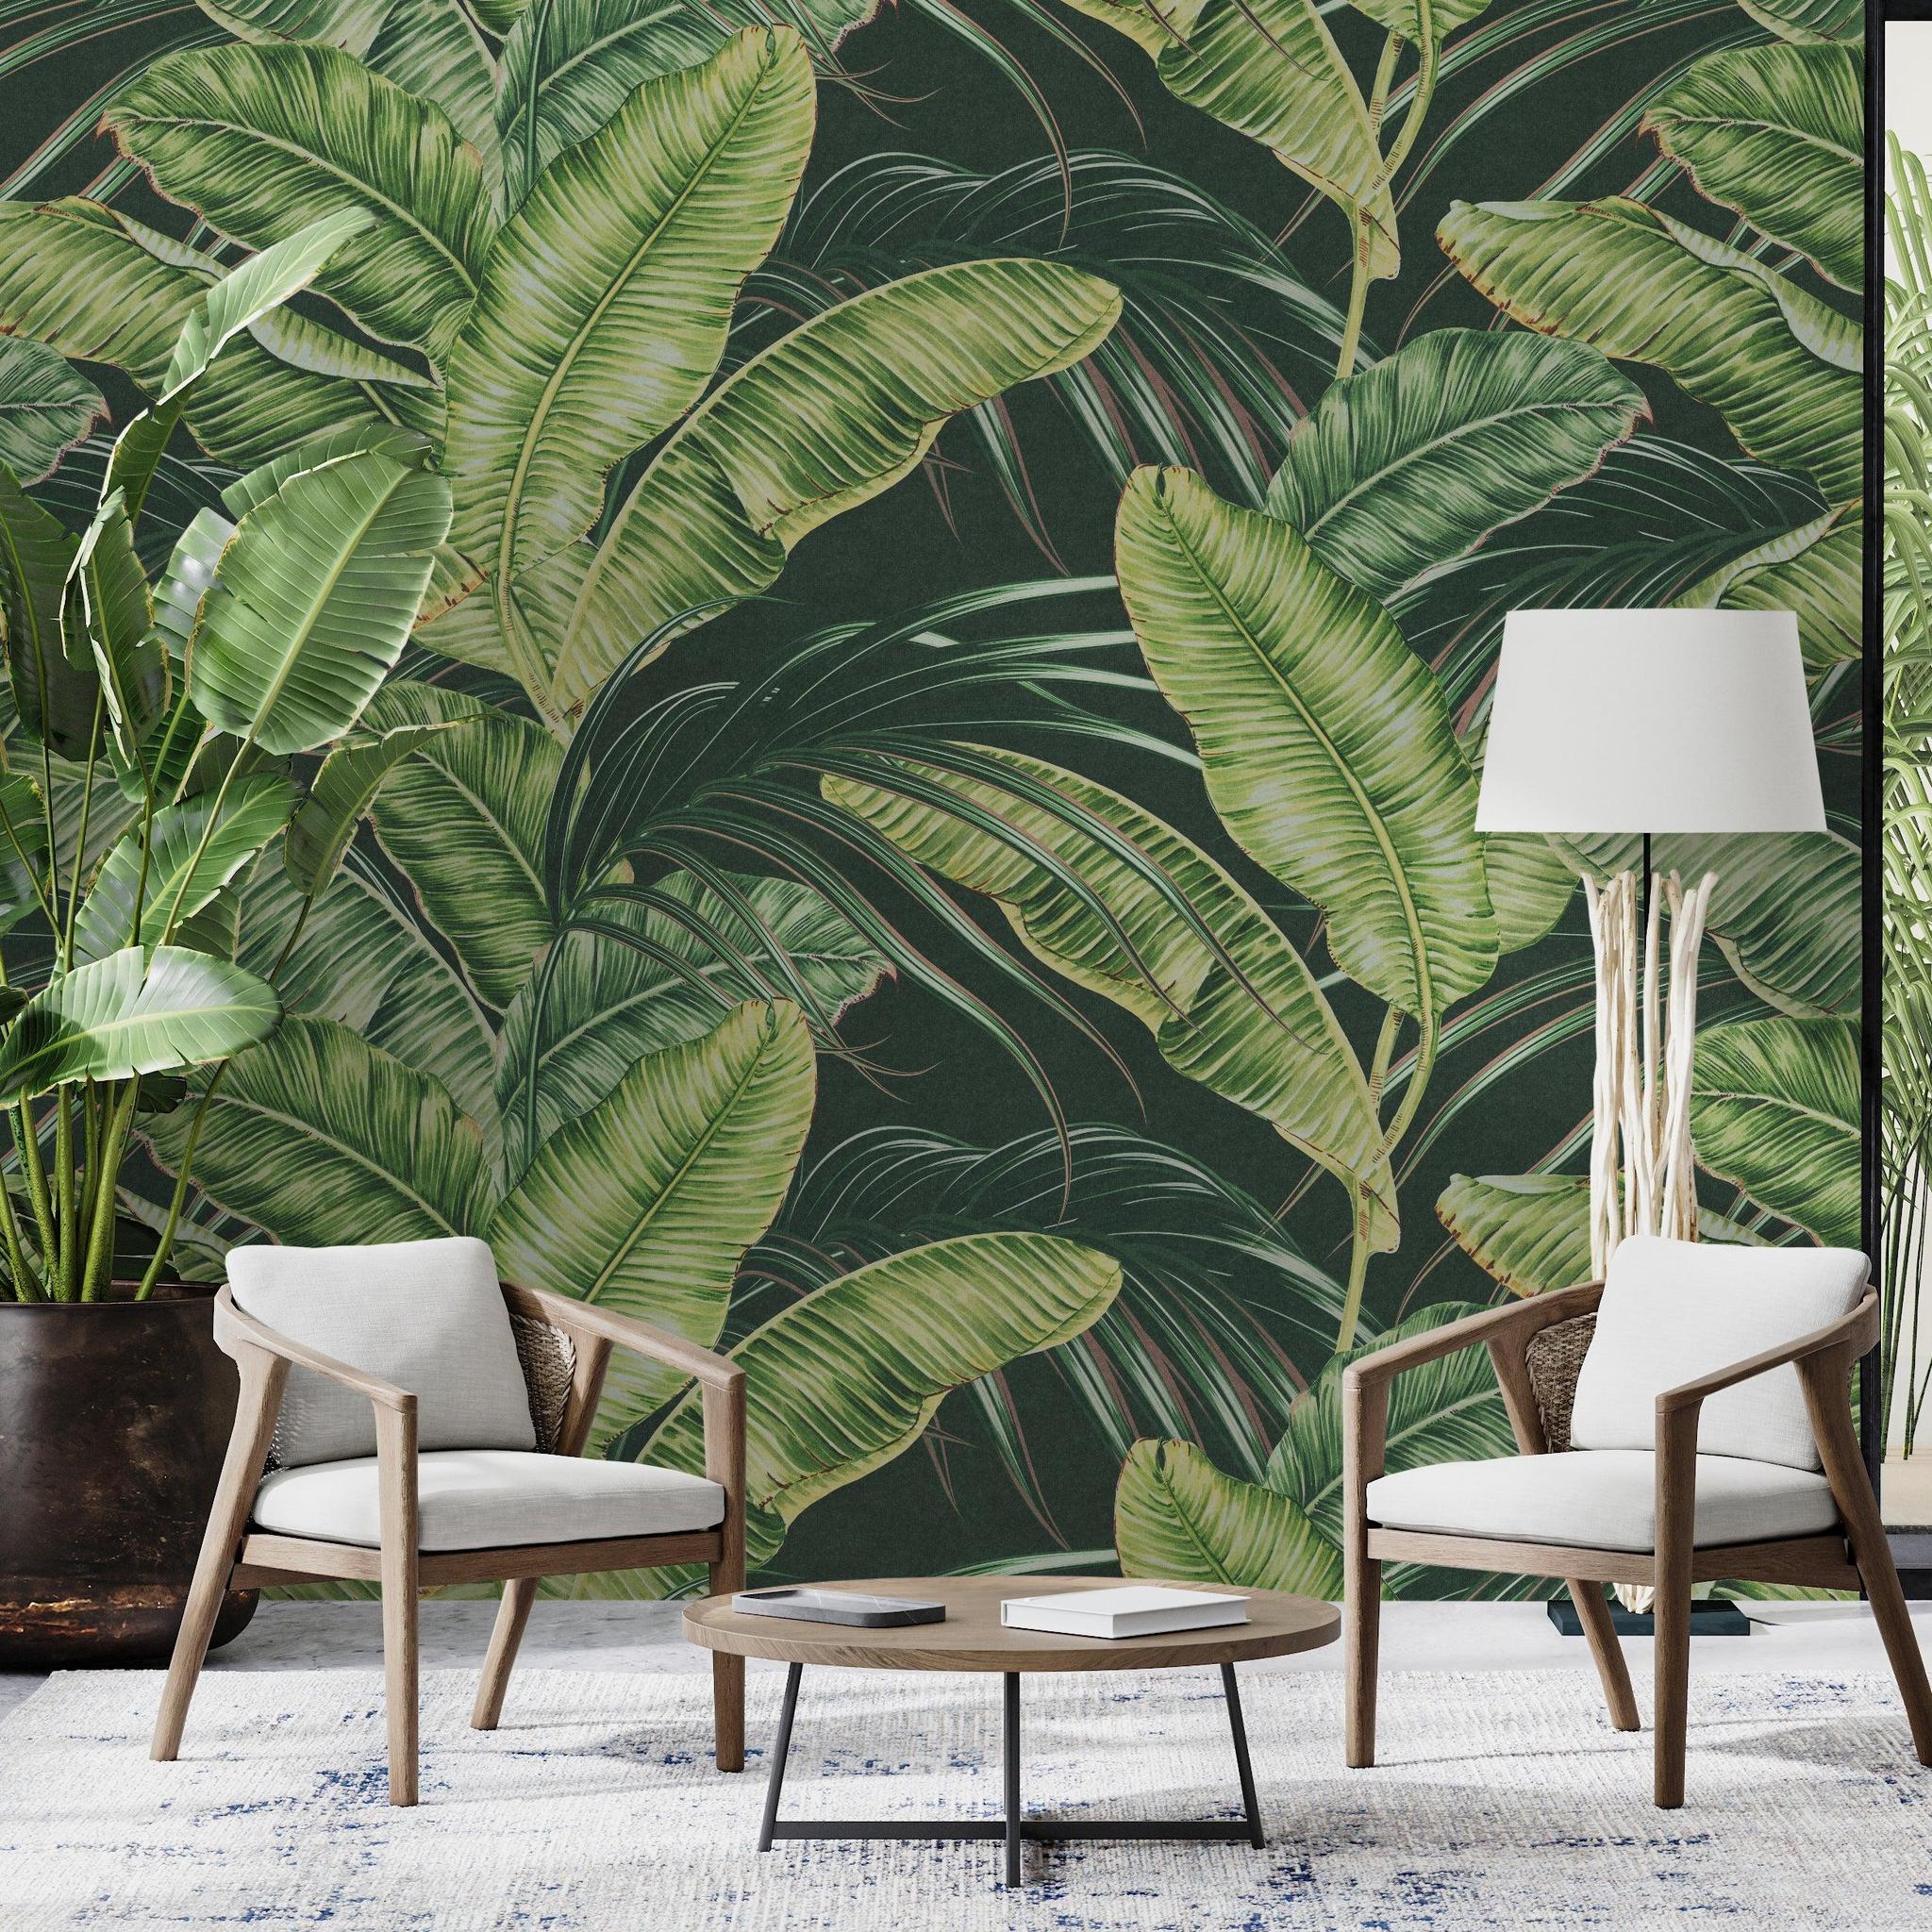 Sterlitzia Wallpaper by Wall Blush SG02 in a stylish living room, highlighting tropical design.
